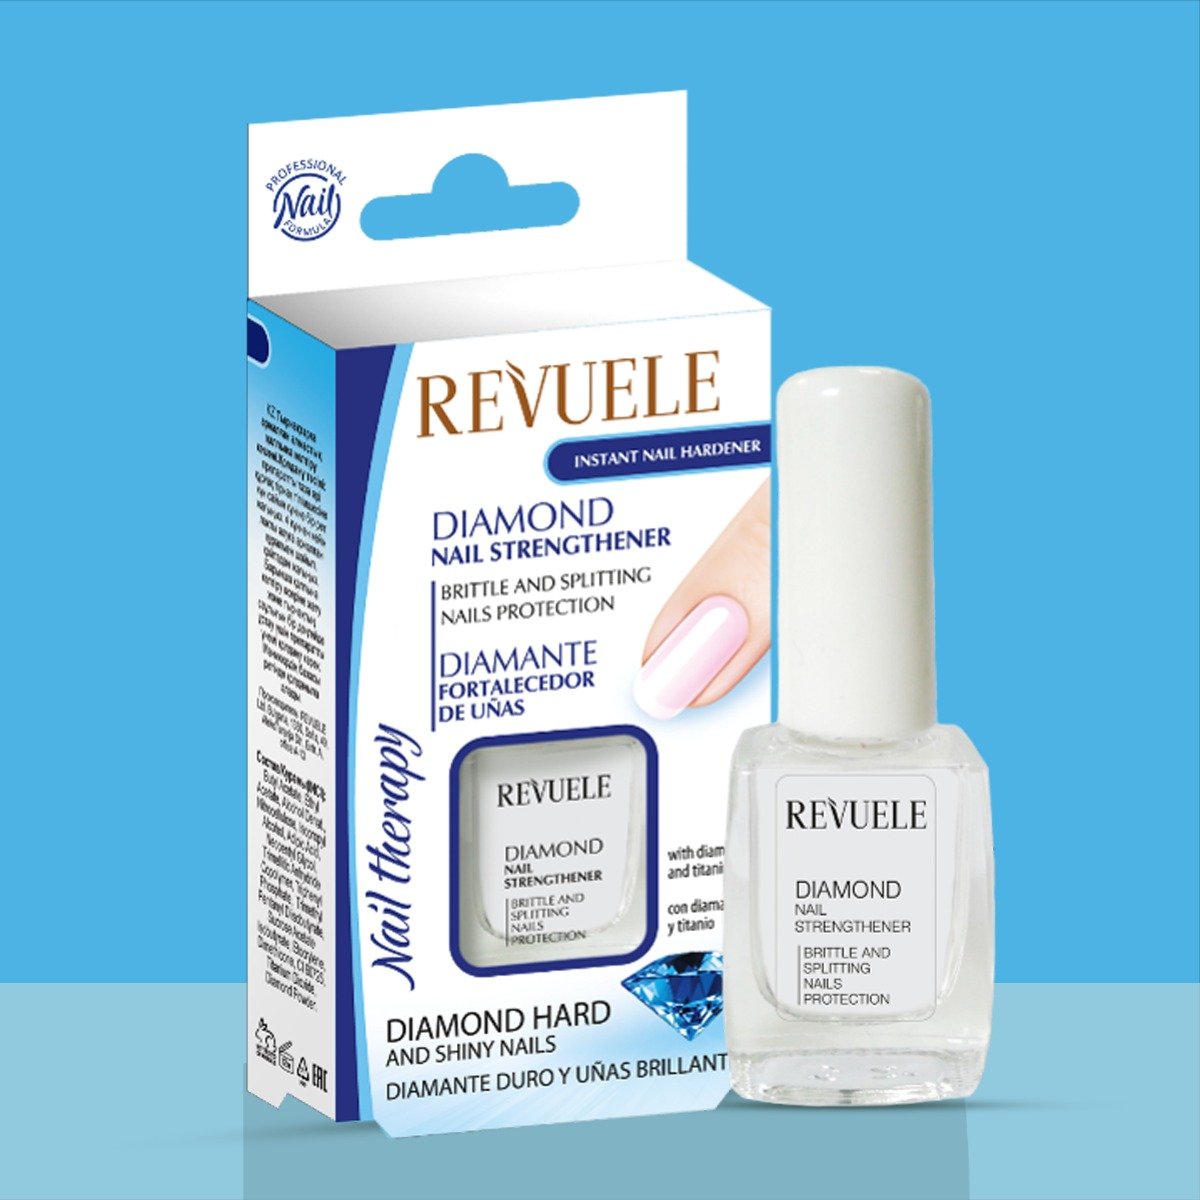 Revuele 9 in1 Nail Therapy Complex For Healthy Nails